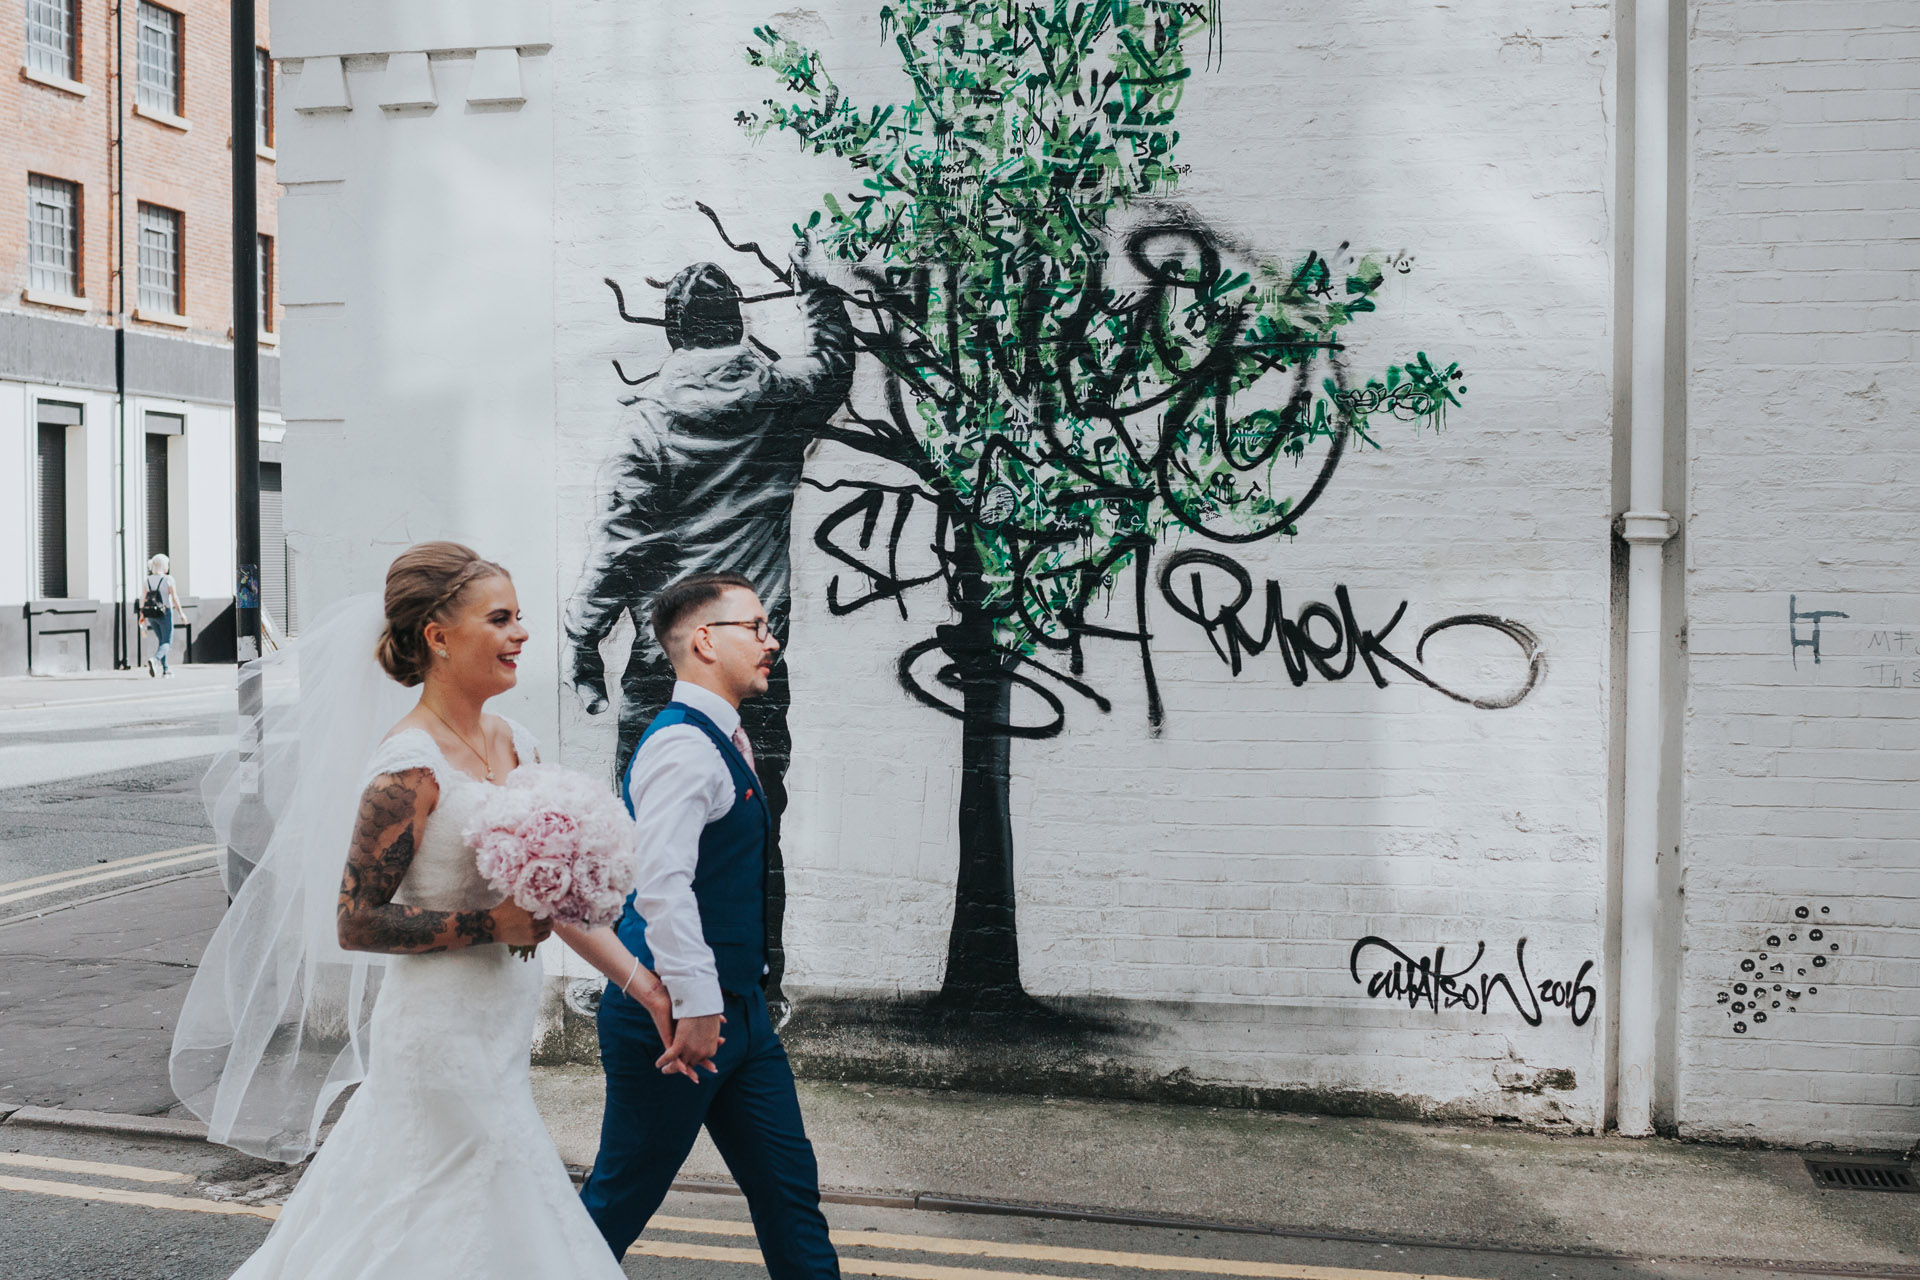 Bride and Groom walk past tree graffiti on Faraday Street, Manchester. Photograph processed in colour. 